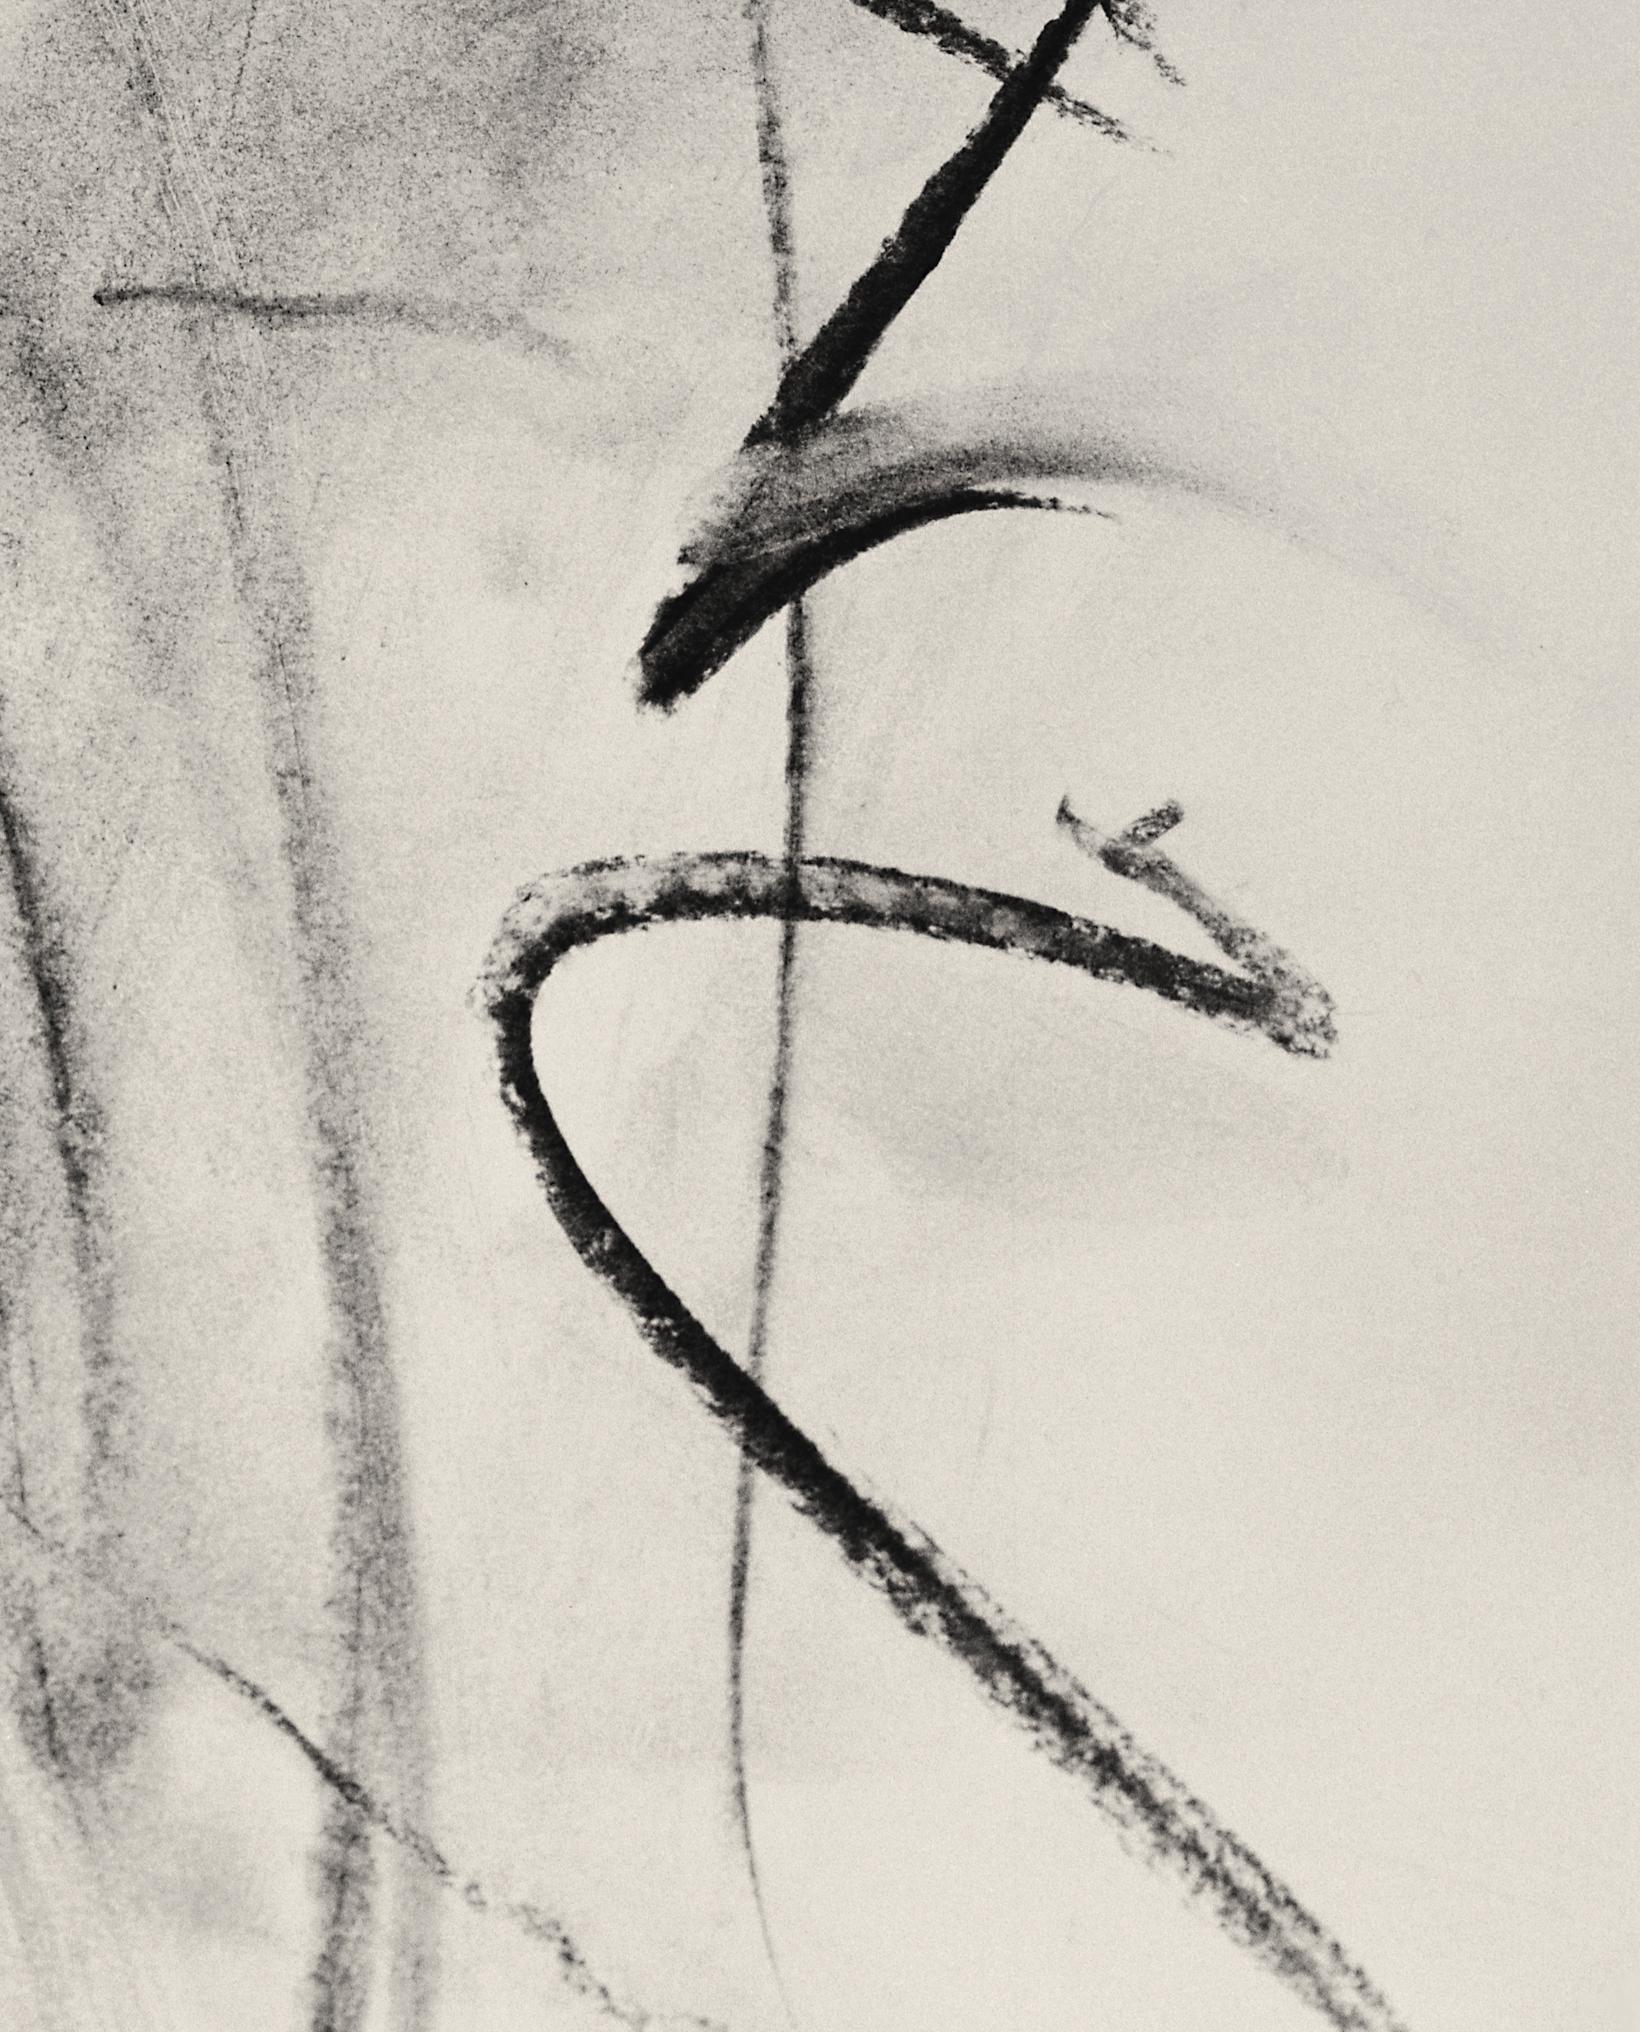 'Lily in Charcoal' 2023

From raw energy to sublime. 'Lily in Charcoal' is an expression piece combining an abstract charcoal drawing with a live lily emerging from a gash. The charcoal medium creates contrast and texture, while the abstract style